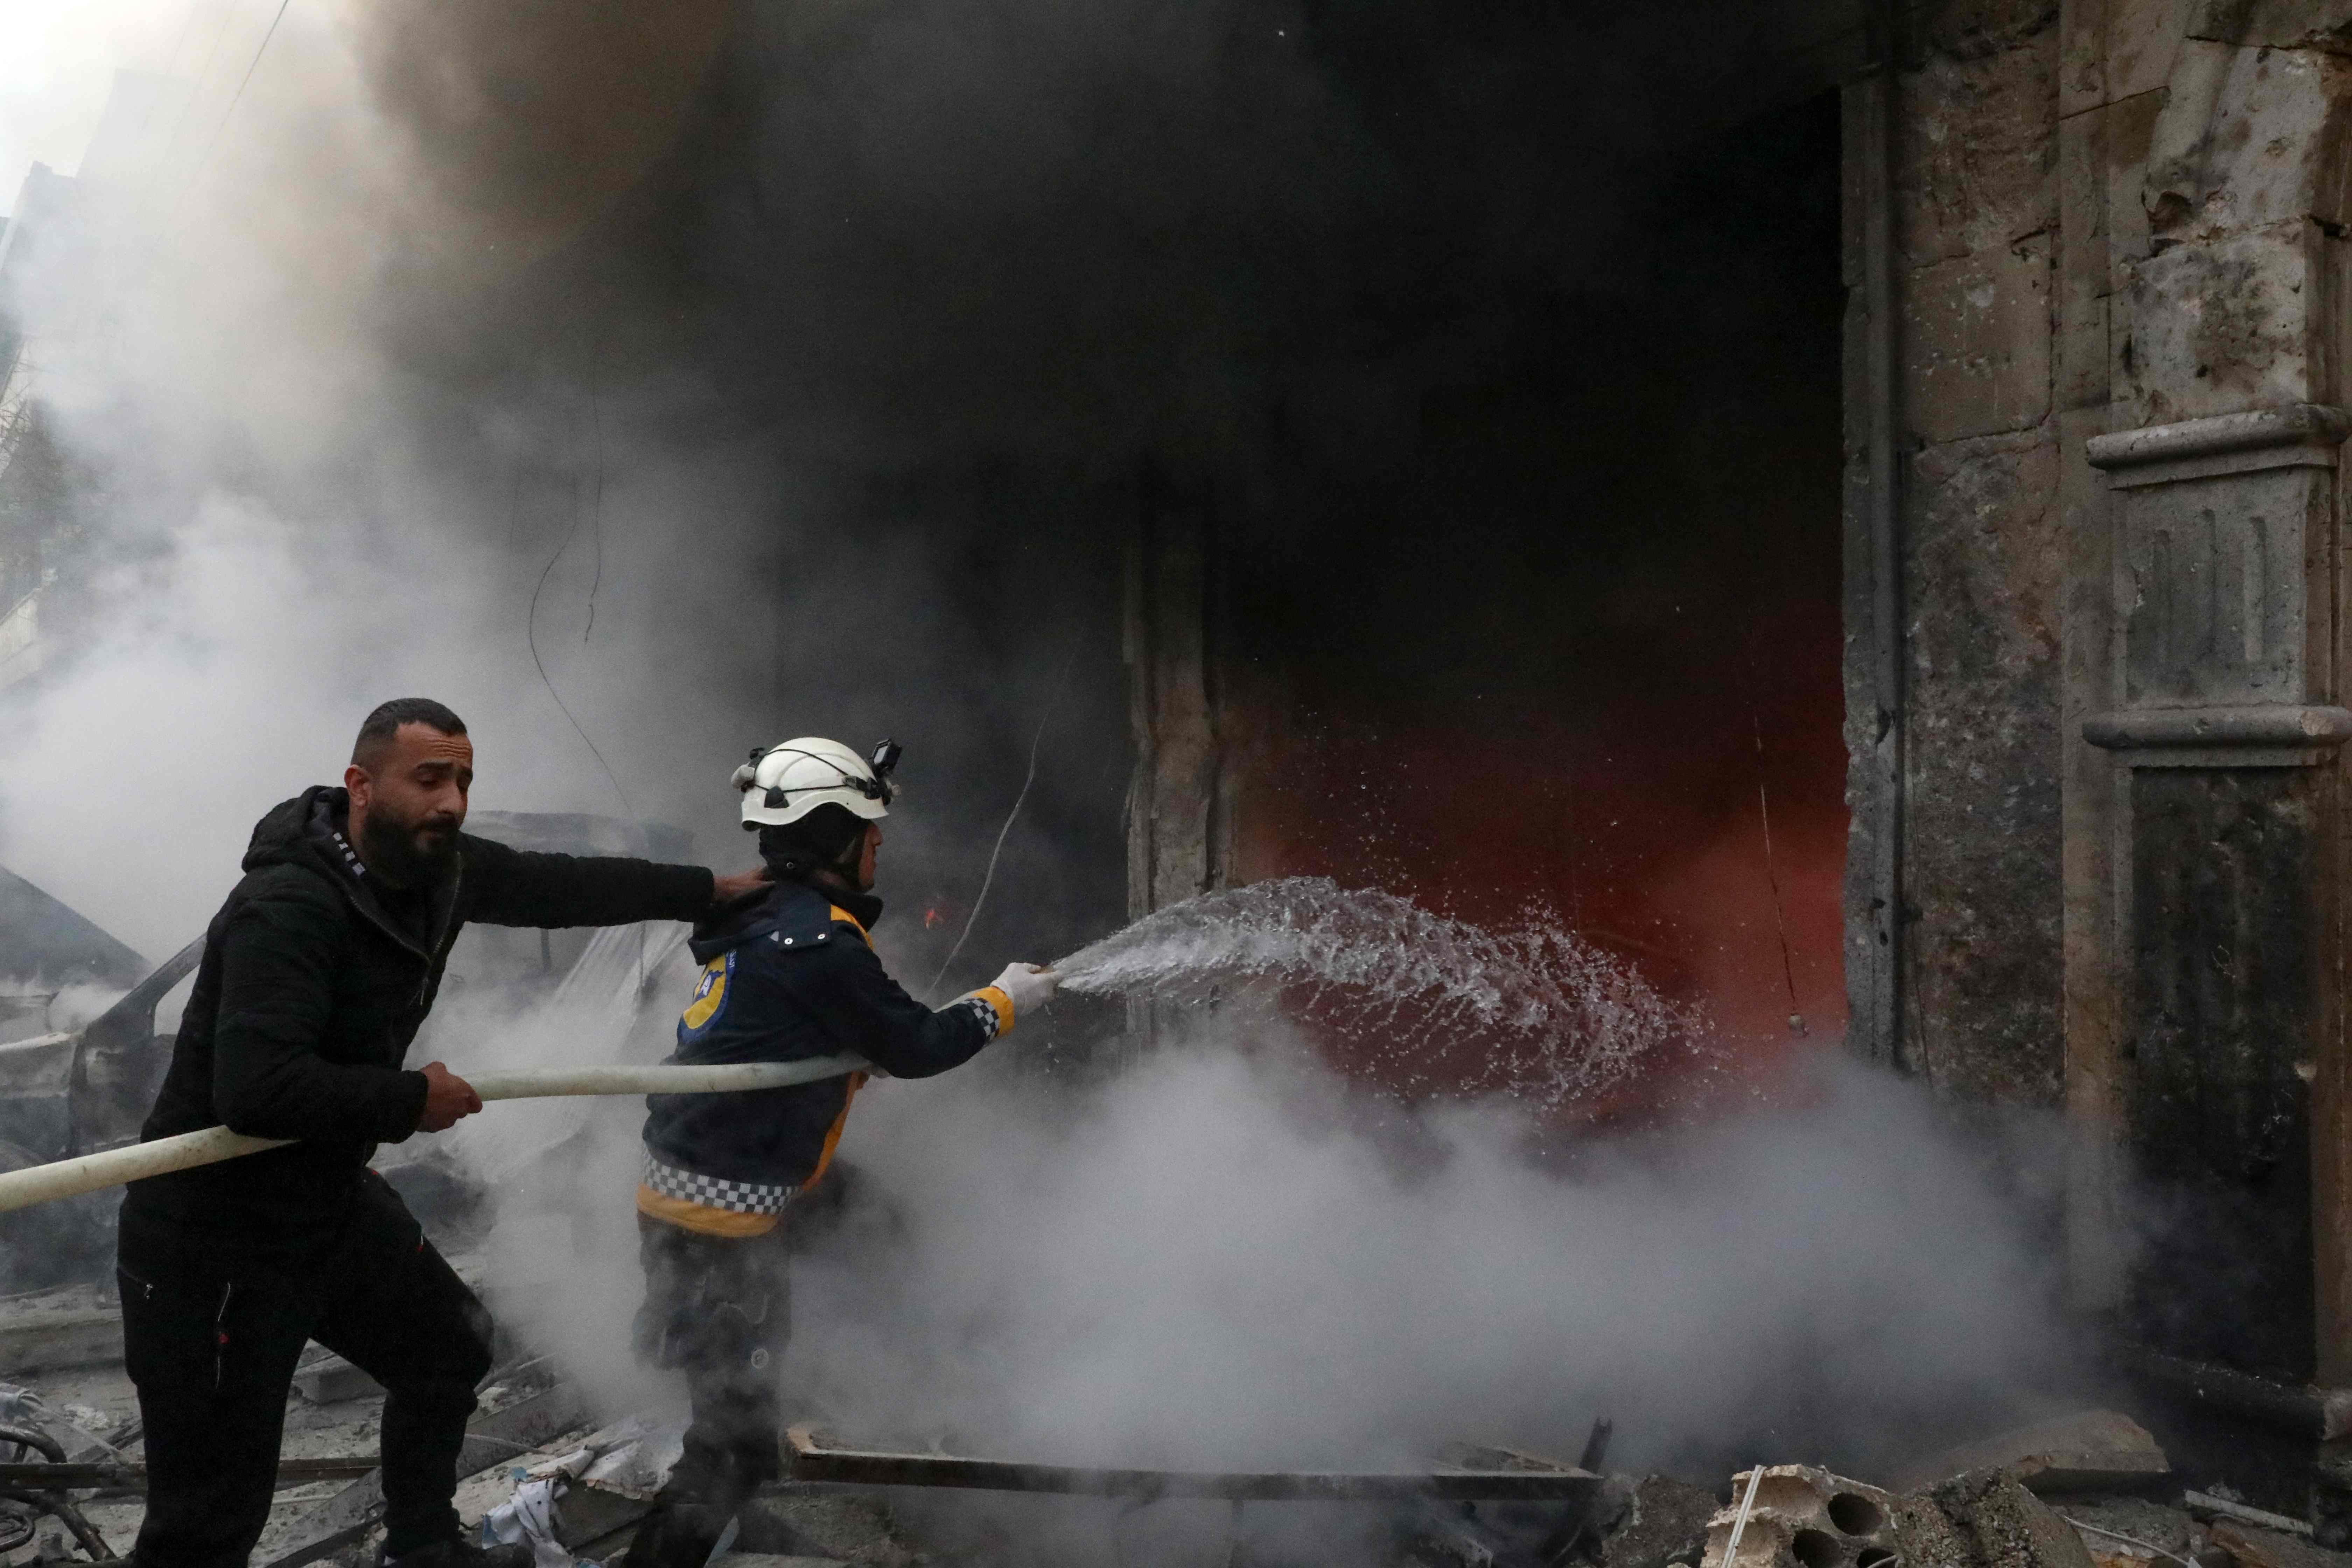 Rescue workers extinguish a fire cause by an explosion in the town of Azaz